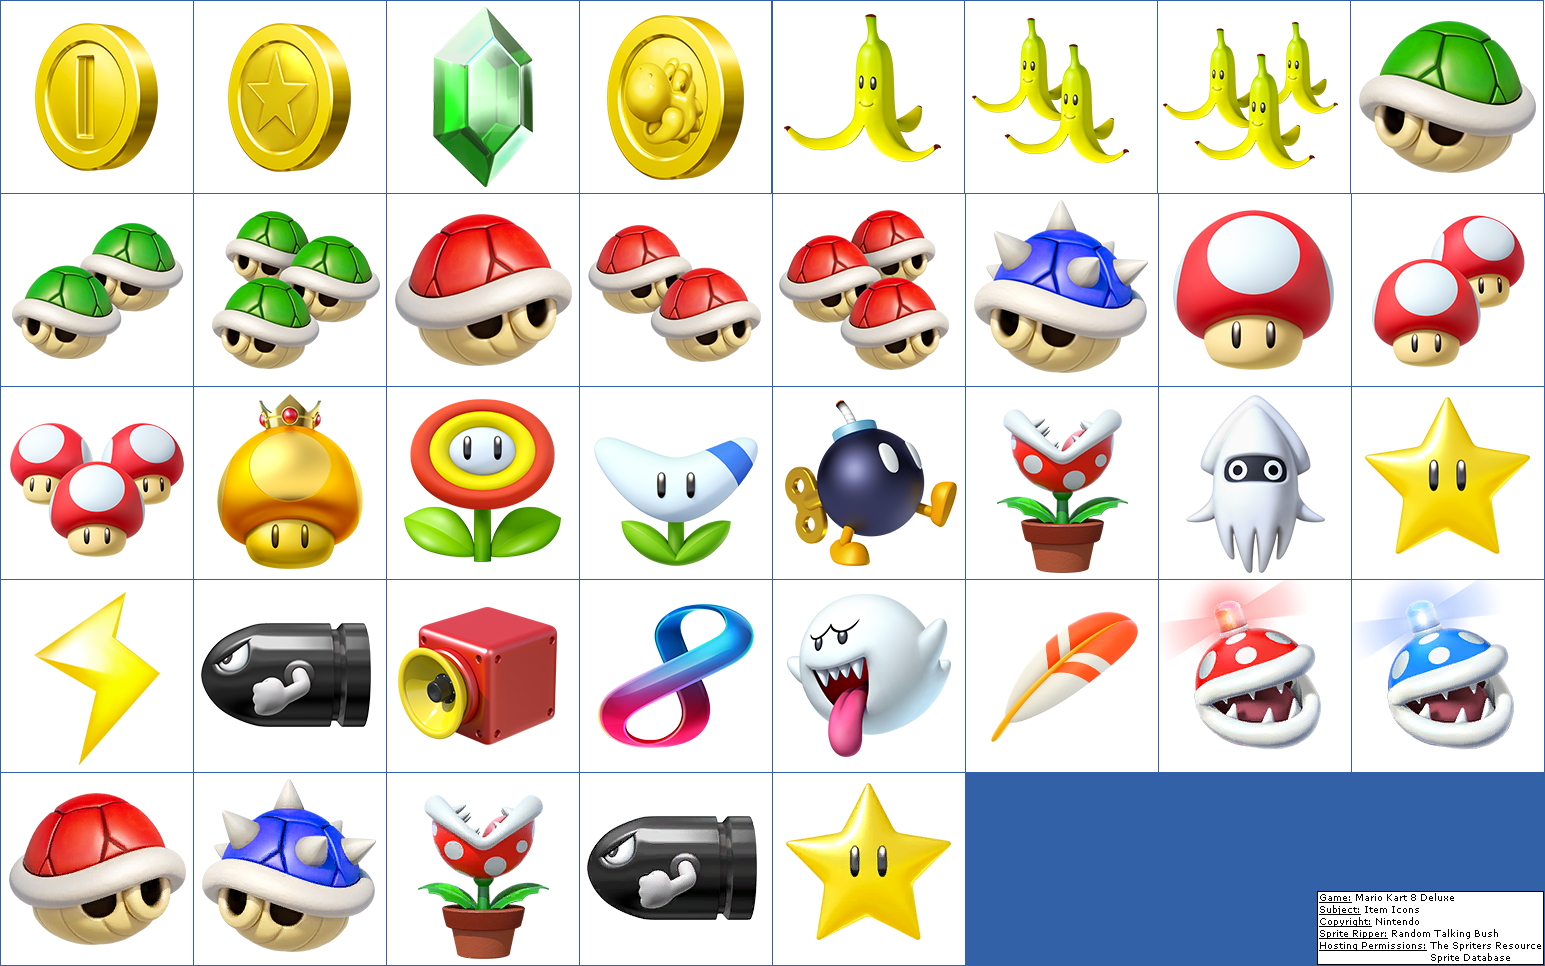 The Spriters Resource Full Sheet View Mario Kart 8 Deluxe Item Icons 8043